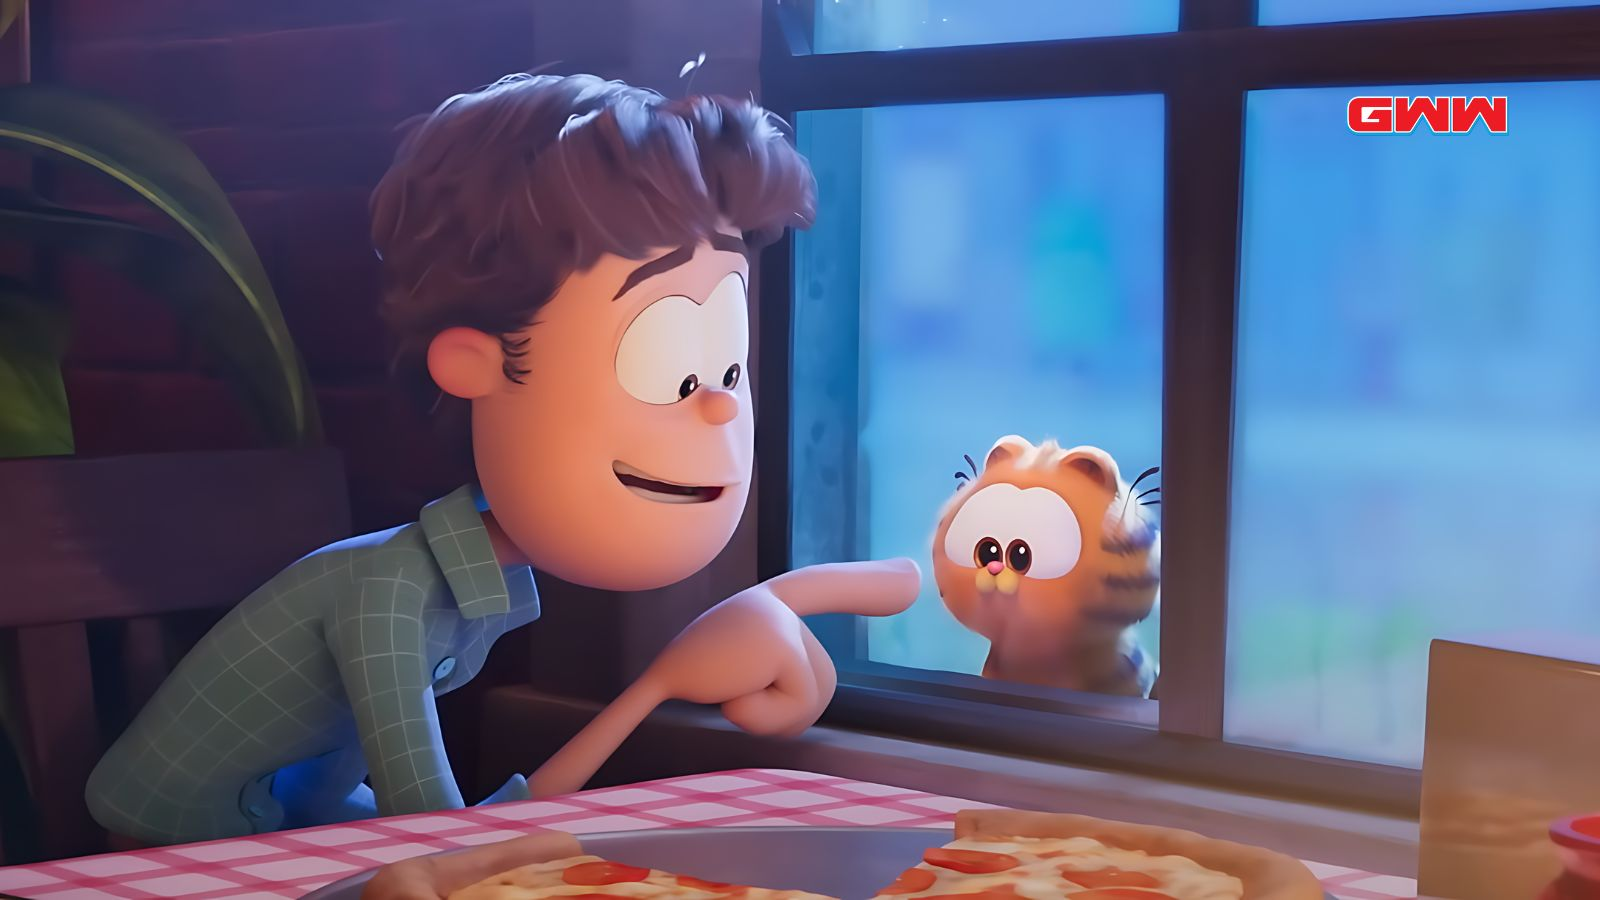 Jon Arbuckle smiling at small orange Garfield beside a pizza.